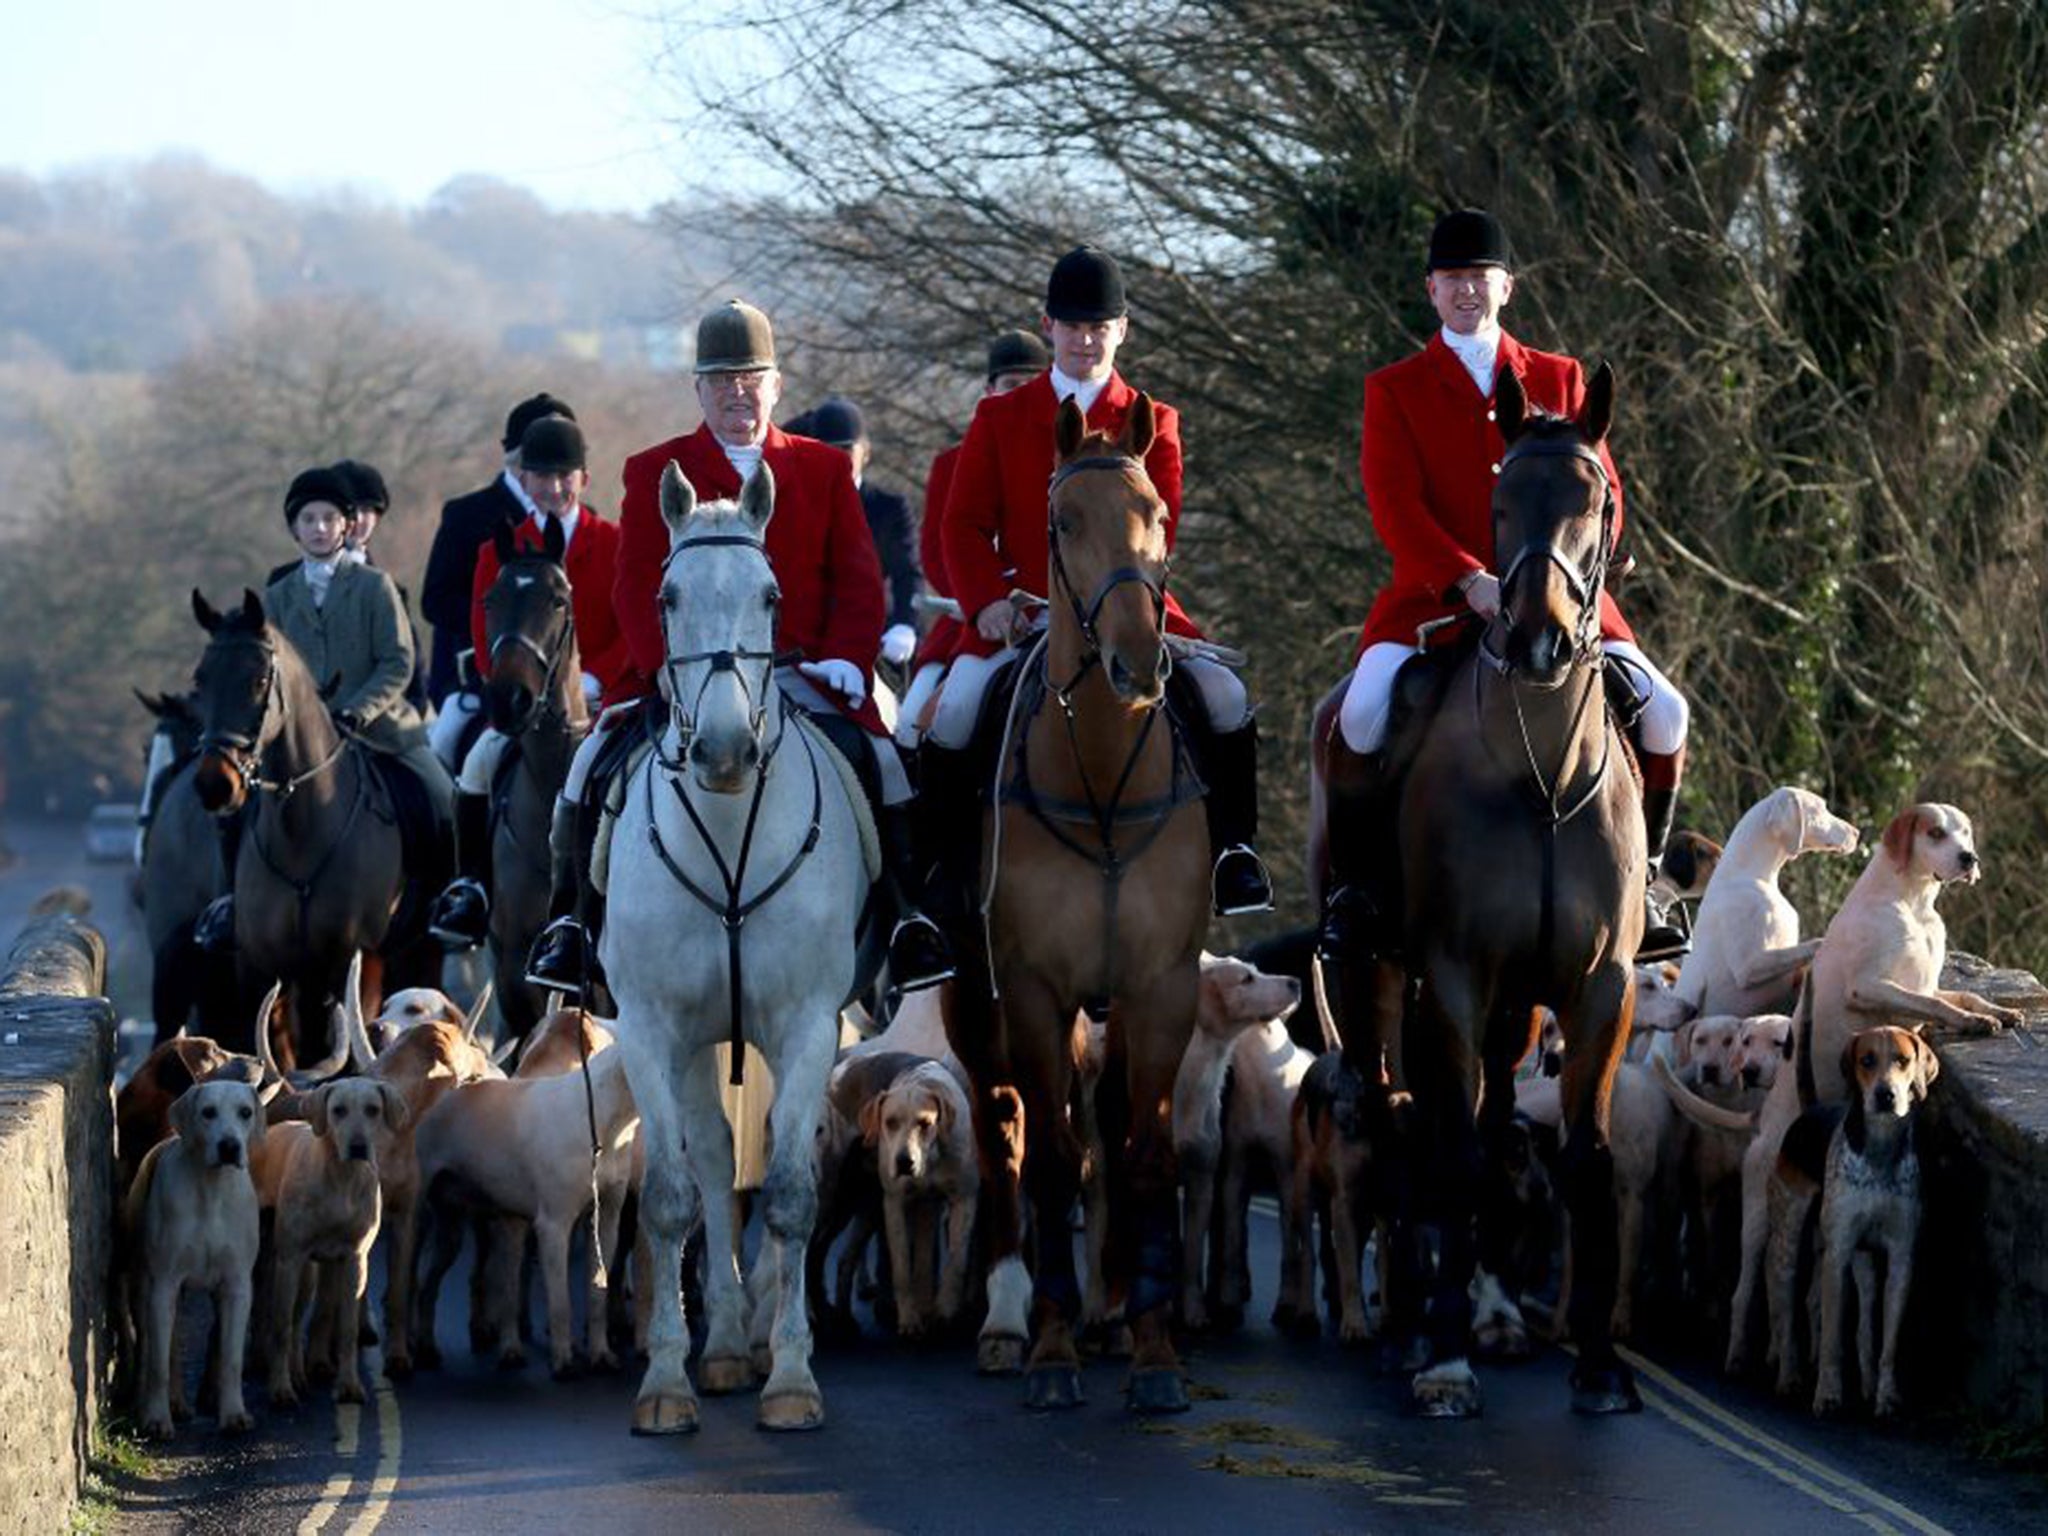 The legal Avon Vale Hunt in Wiltshire on Boxing Day last year